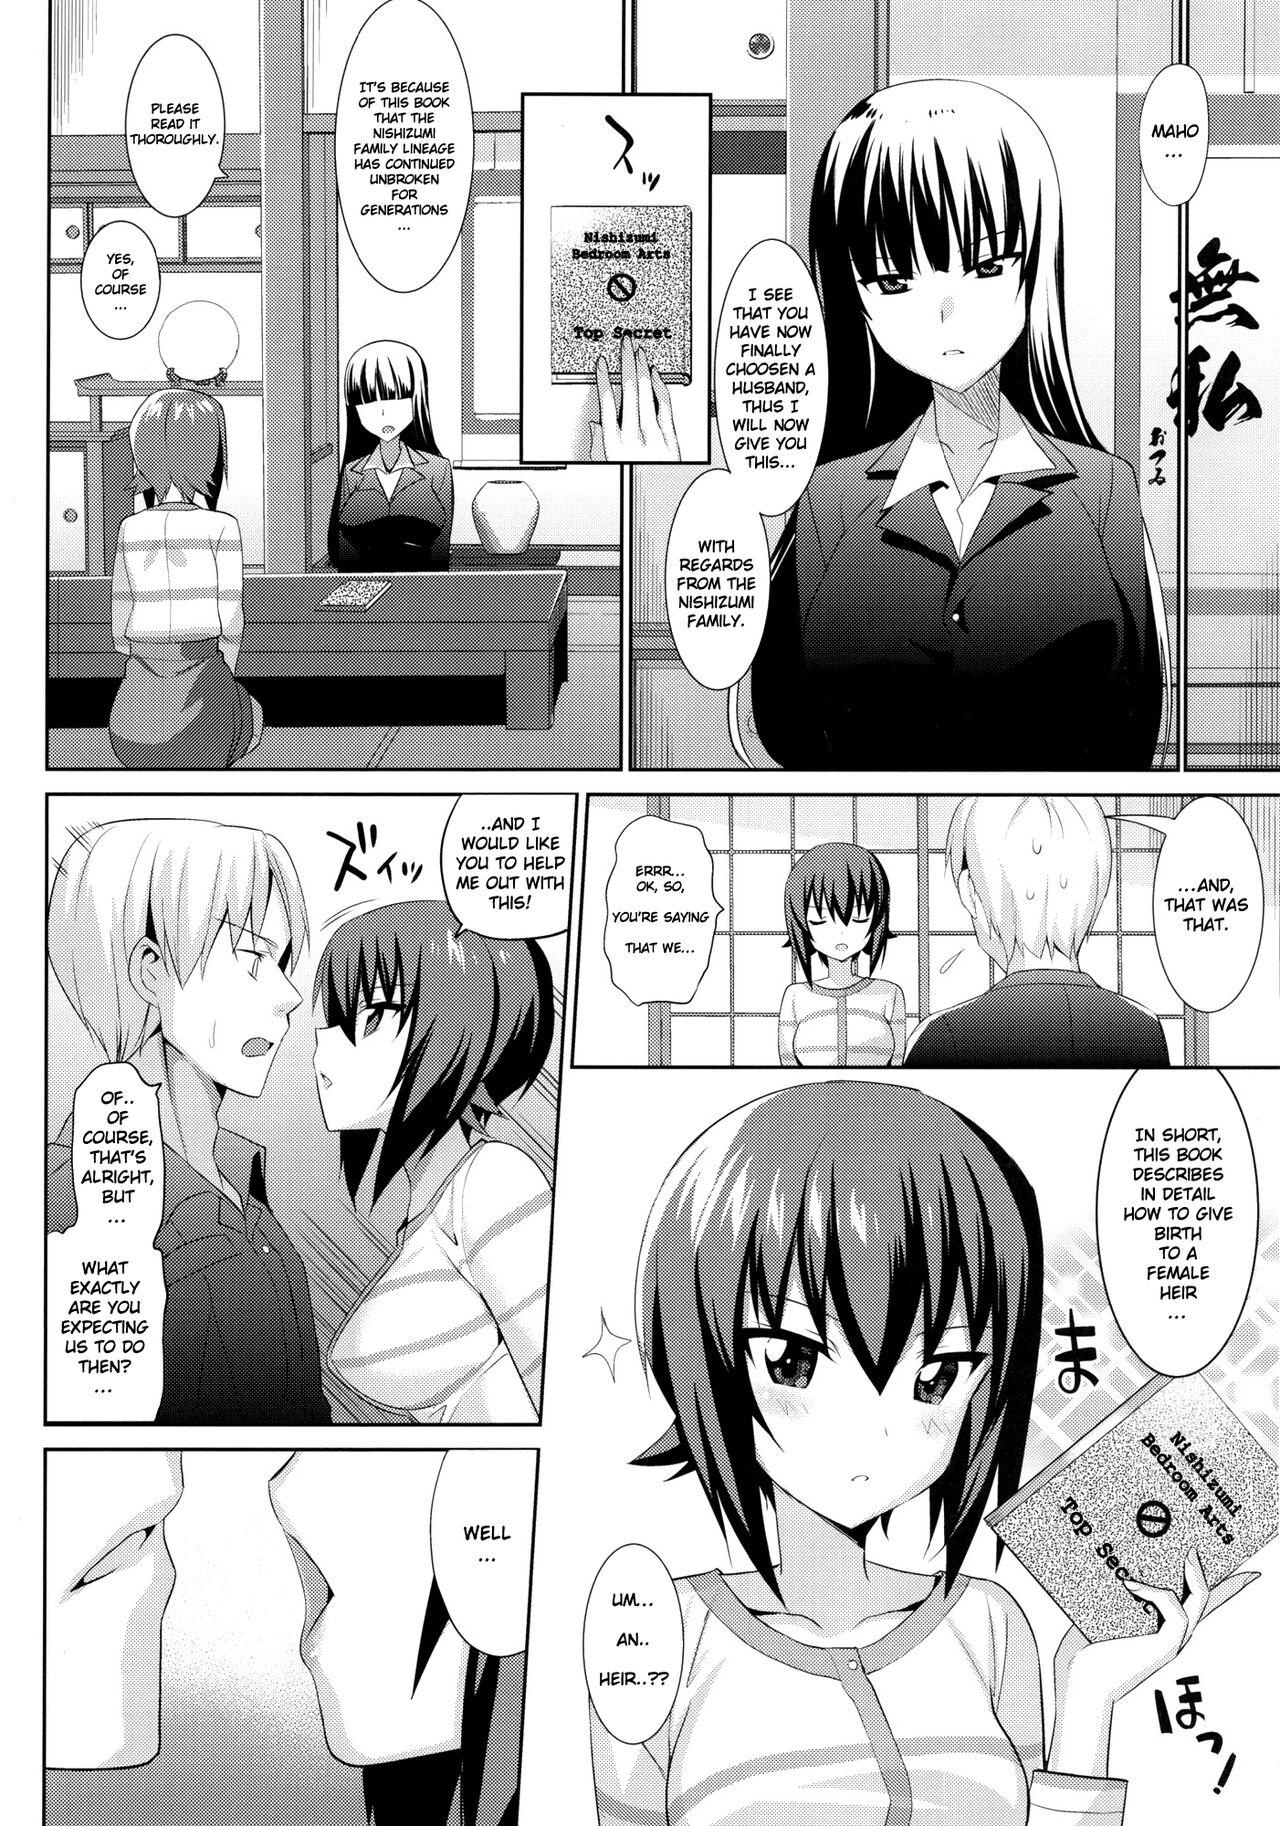 Gostoso LET ME LOVE YOU TOO - Girls und panzer Perrito - Page 5